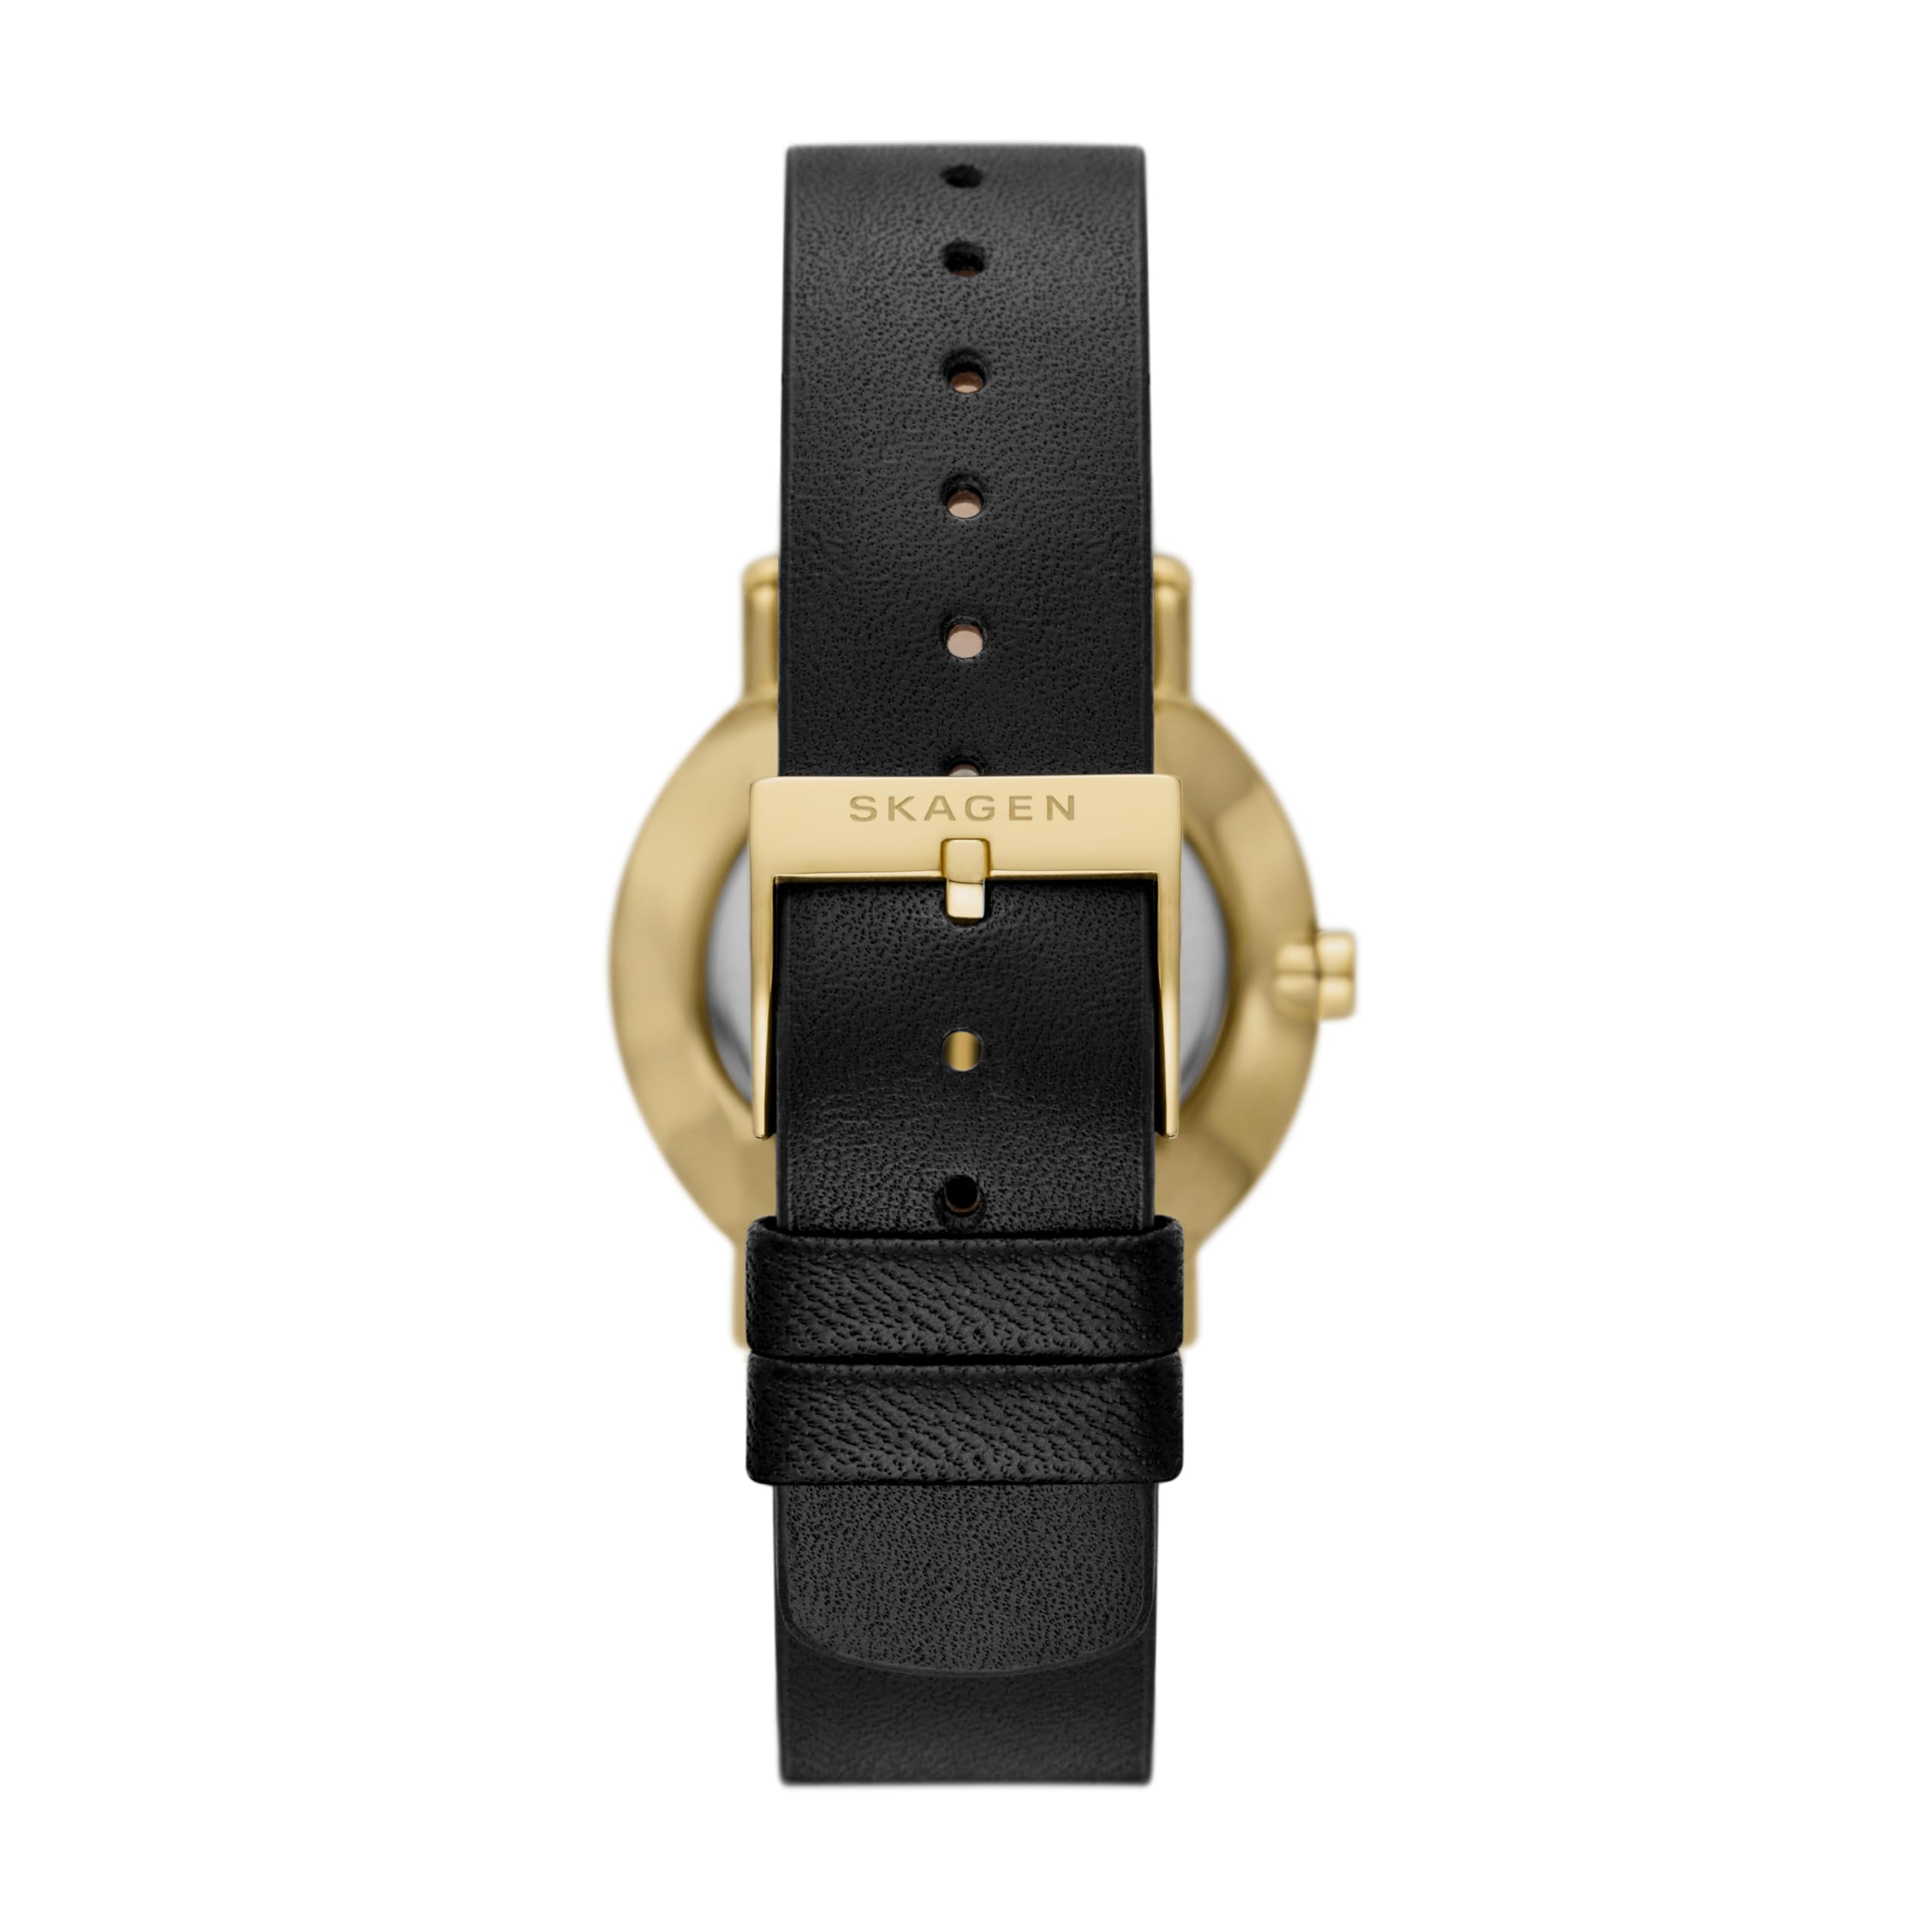 Skagen Women's Kuppel Lille Two-Hand Sub-Second Gold-Tone Stainless Steel and Black Leather Band Watch (Model: SKW3114)